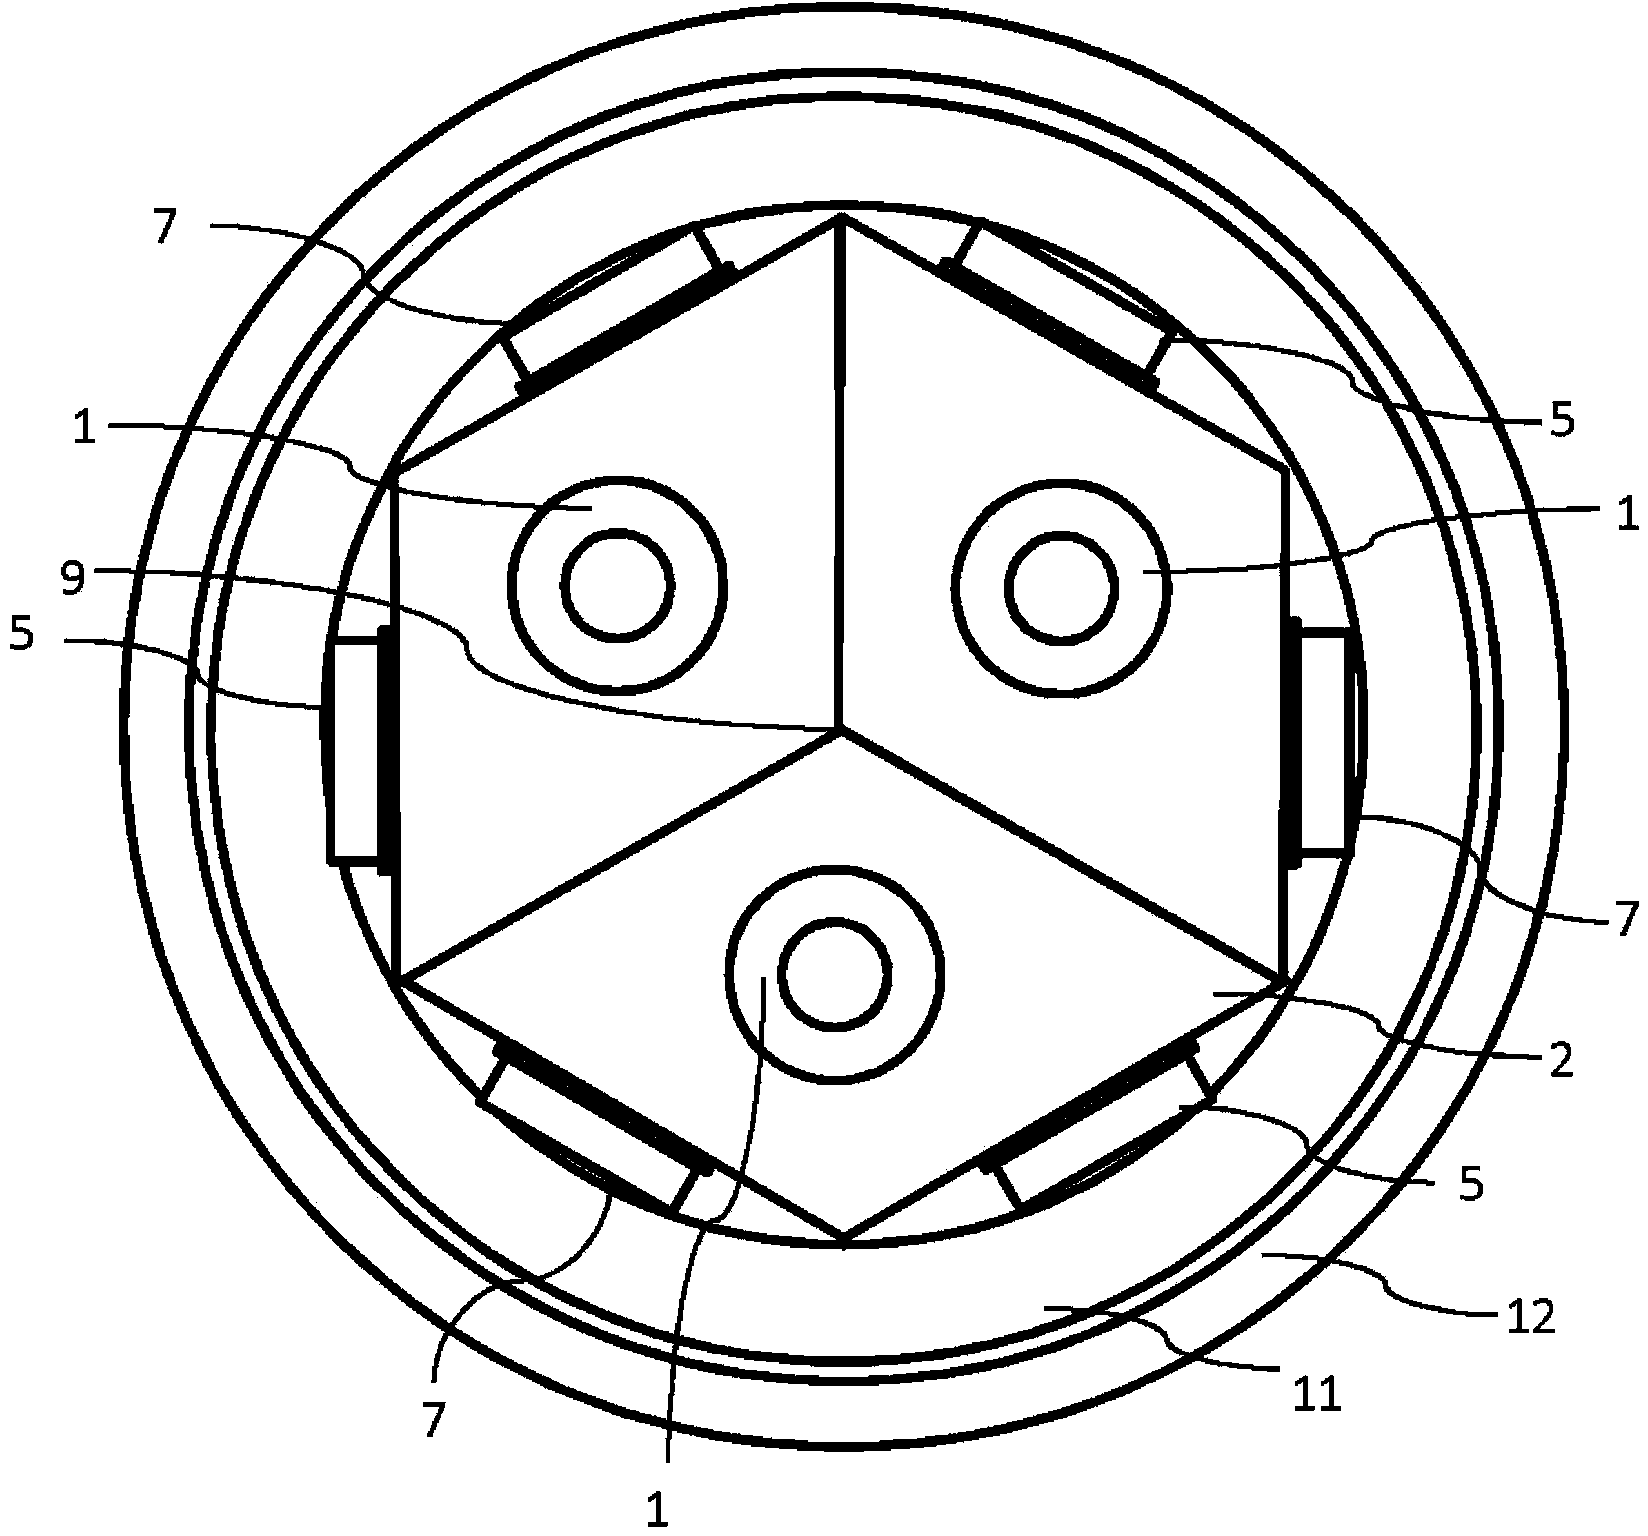 Modular motor inverter arrangement with cooling sections forming inner duct ring capacitor on the outside